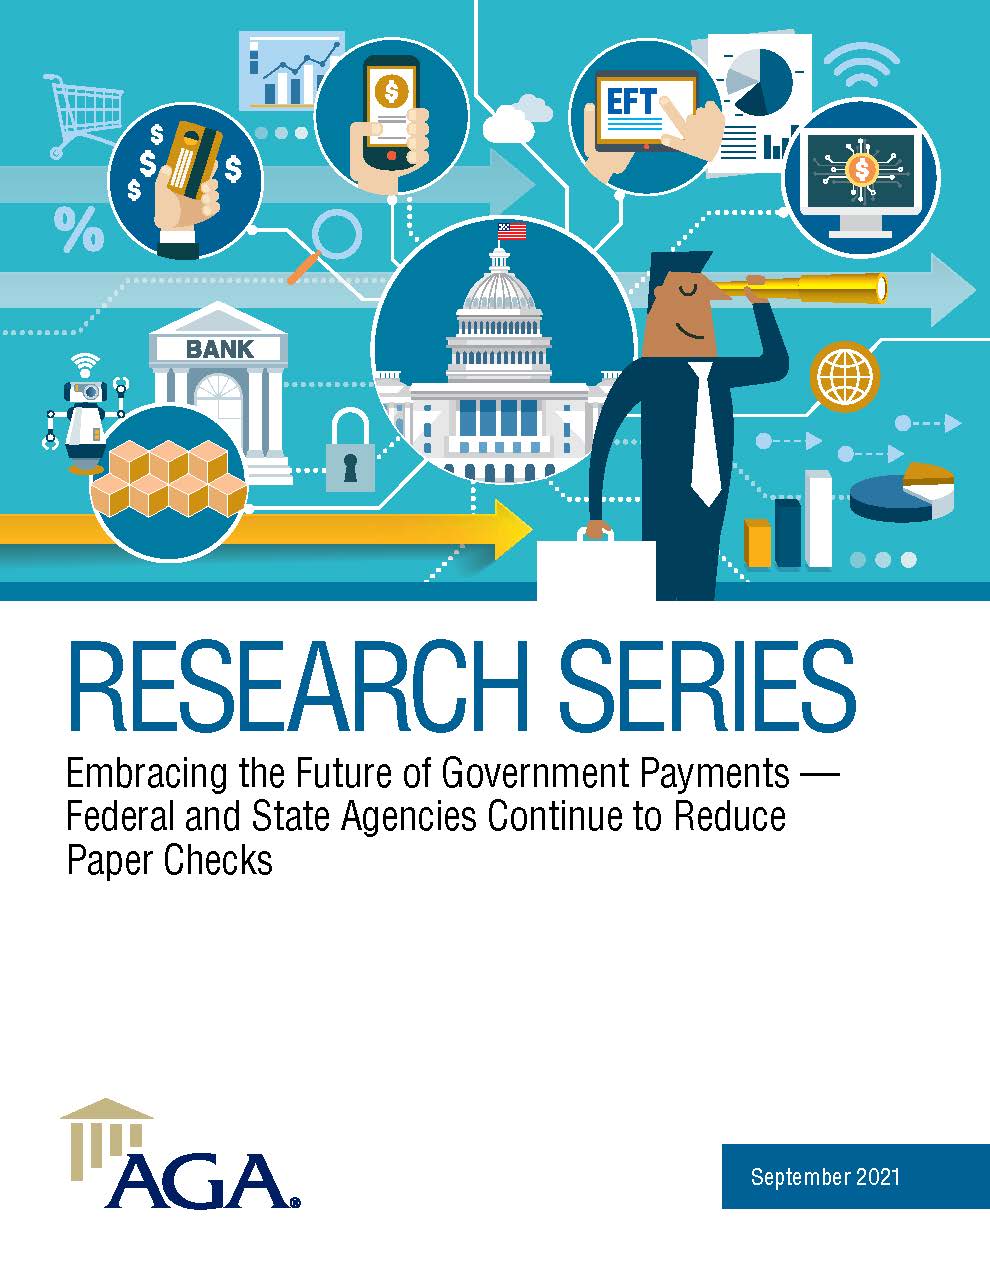 Embracing the Future of Government Payments — Federal and State Agencies Continue to Reduce Paper Checks